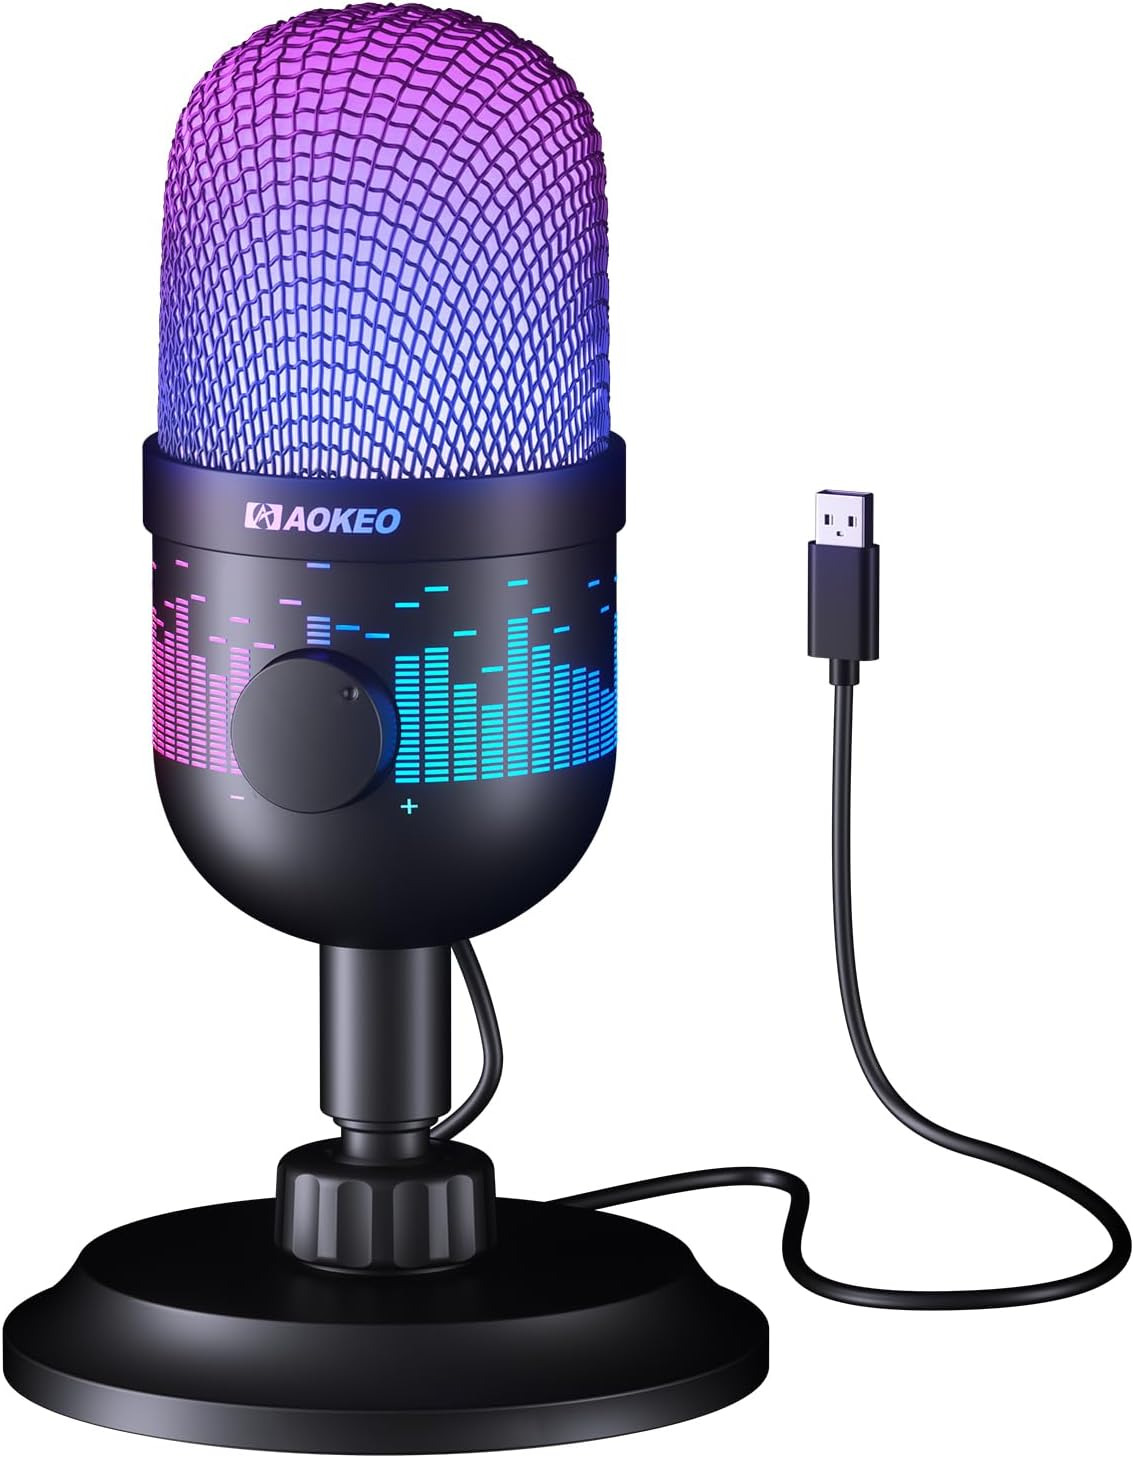 Aokeo Gaming Microphone, USB Computer Microphone for PC, Mac, PS4/5, Condenser